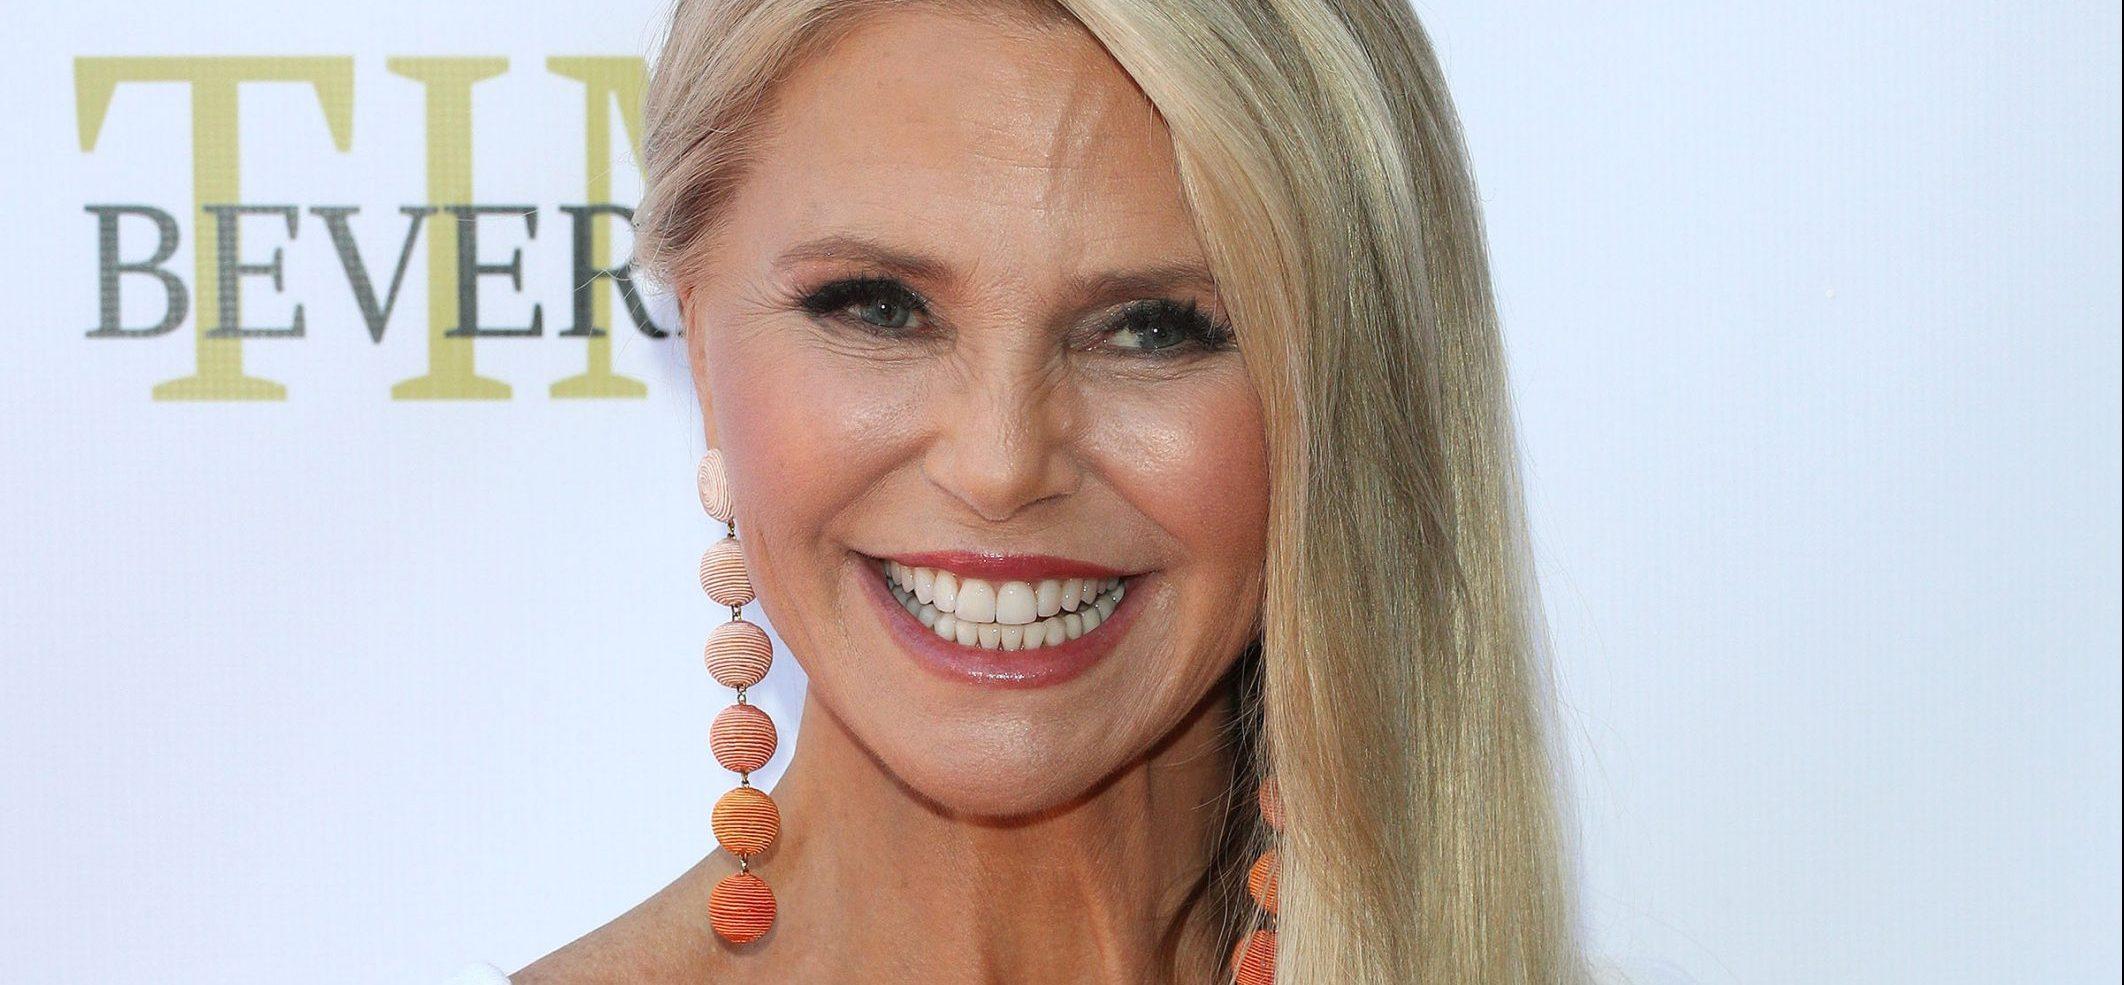 Christie Brinkley In Her Tight Black Swimsuit Says ‘This Is 70’